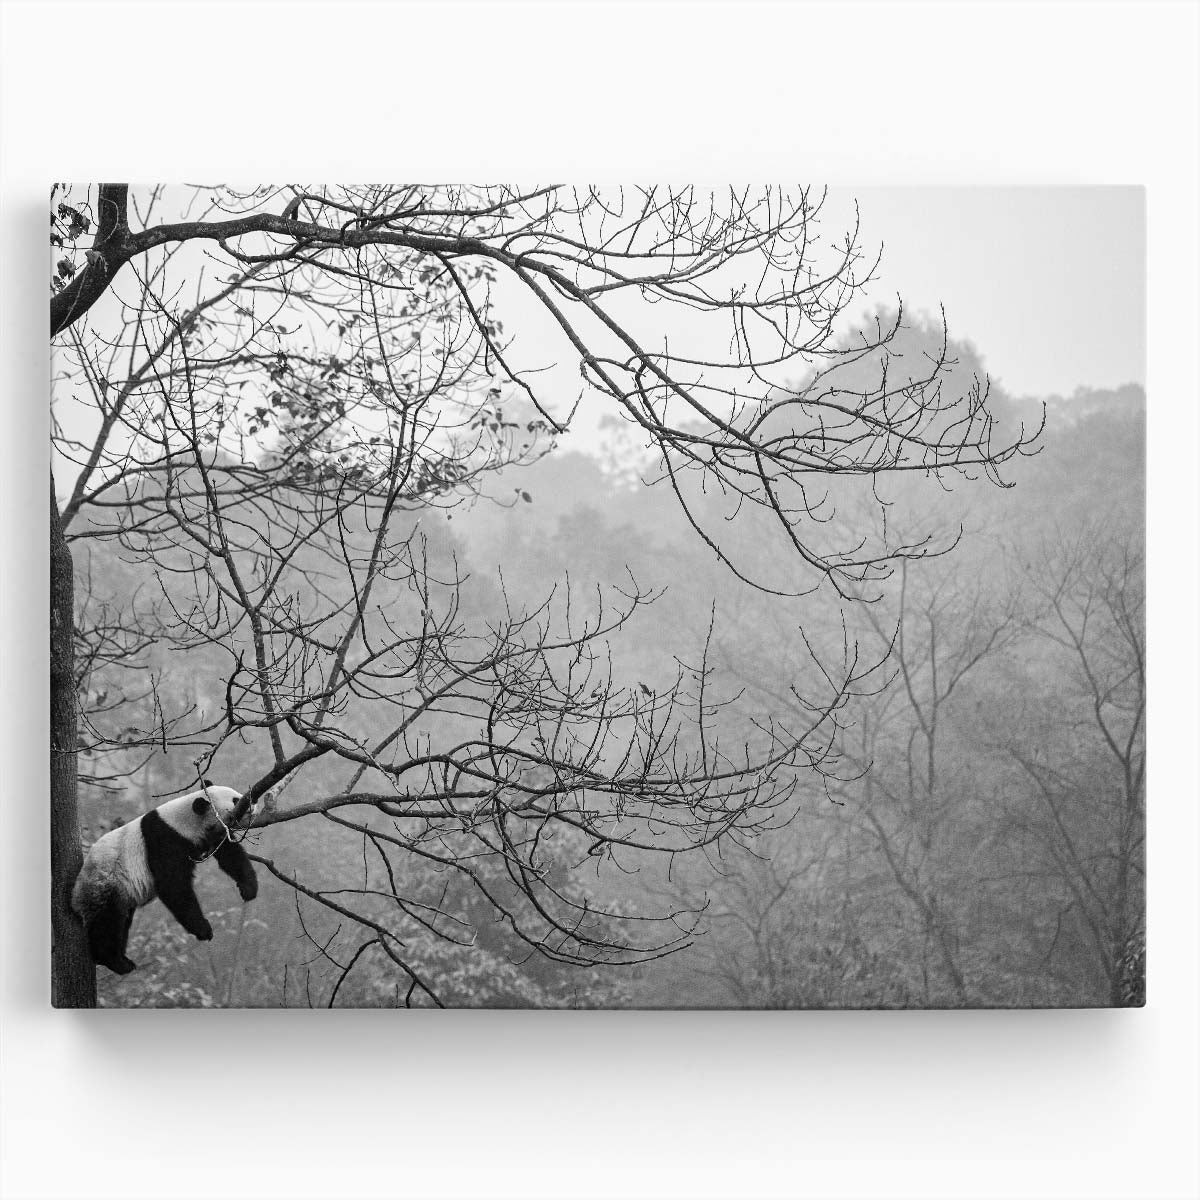 Panda Resting on Tree Monochrome Wildlife Photography Wall Art by Luxuriance Designs. Made in USA.